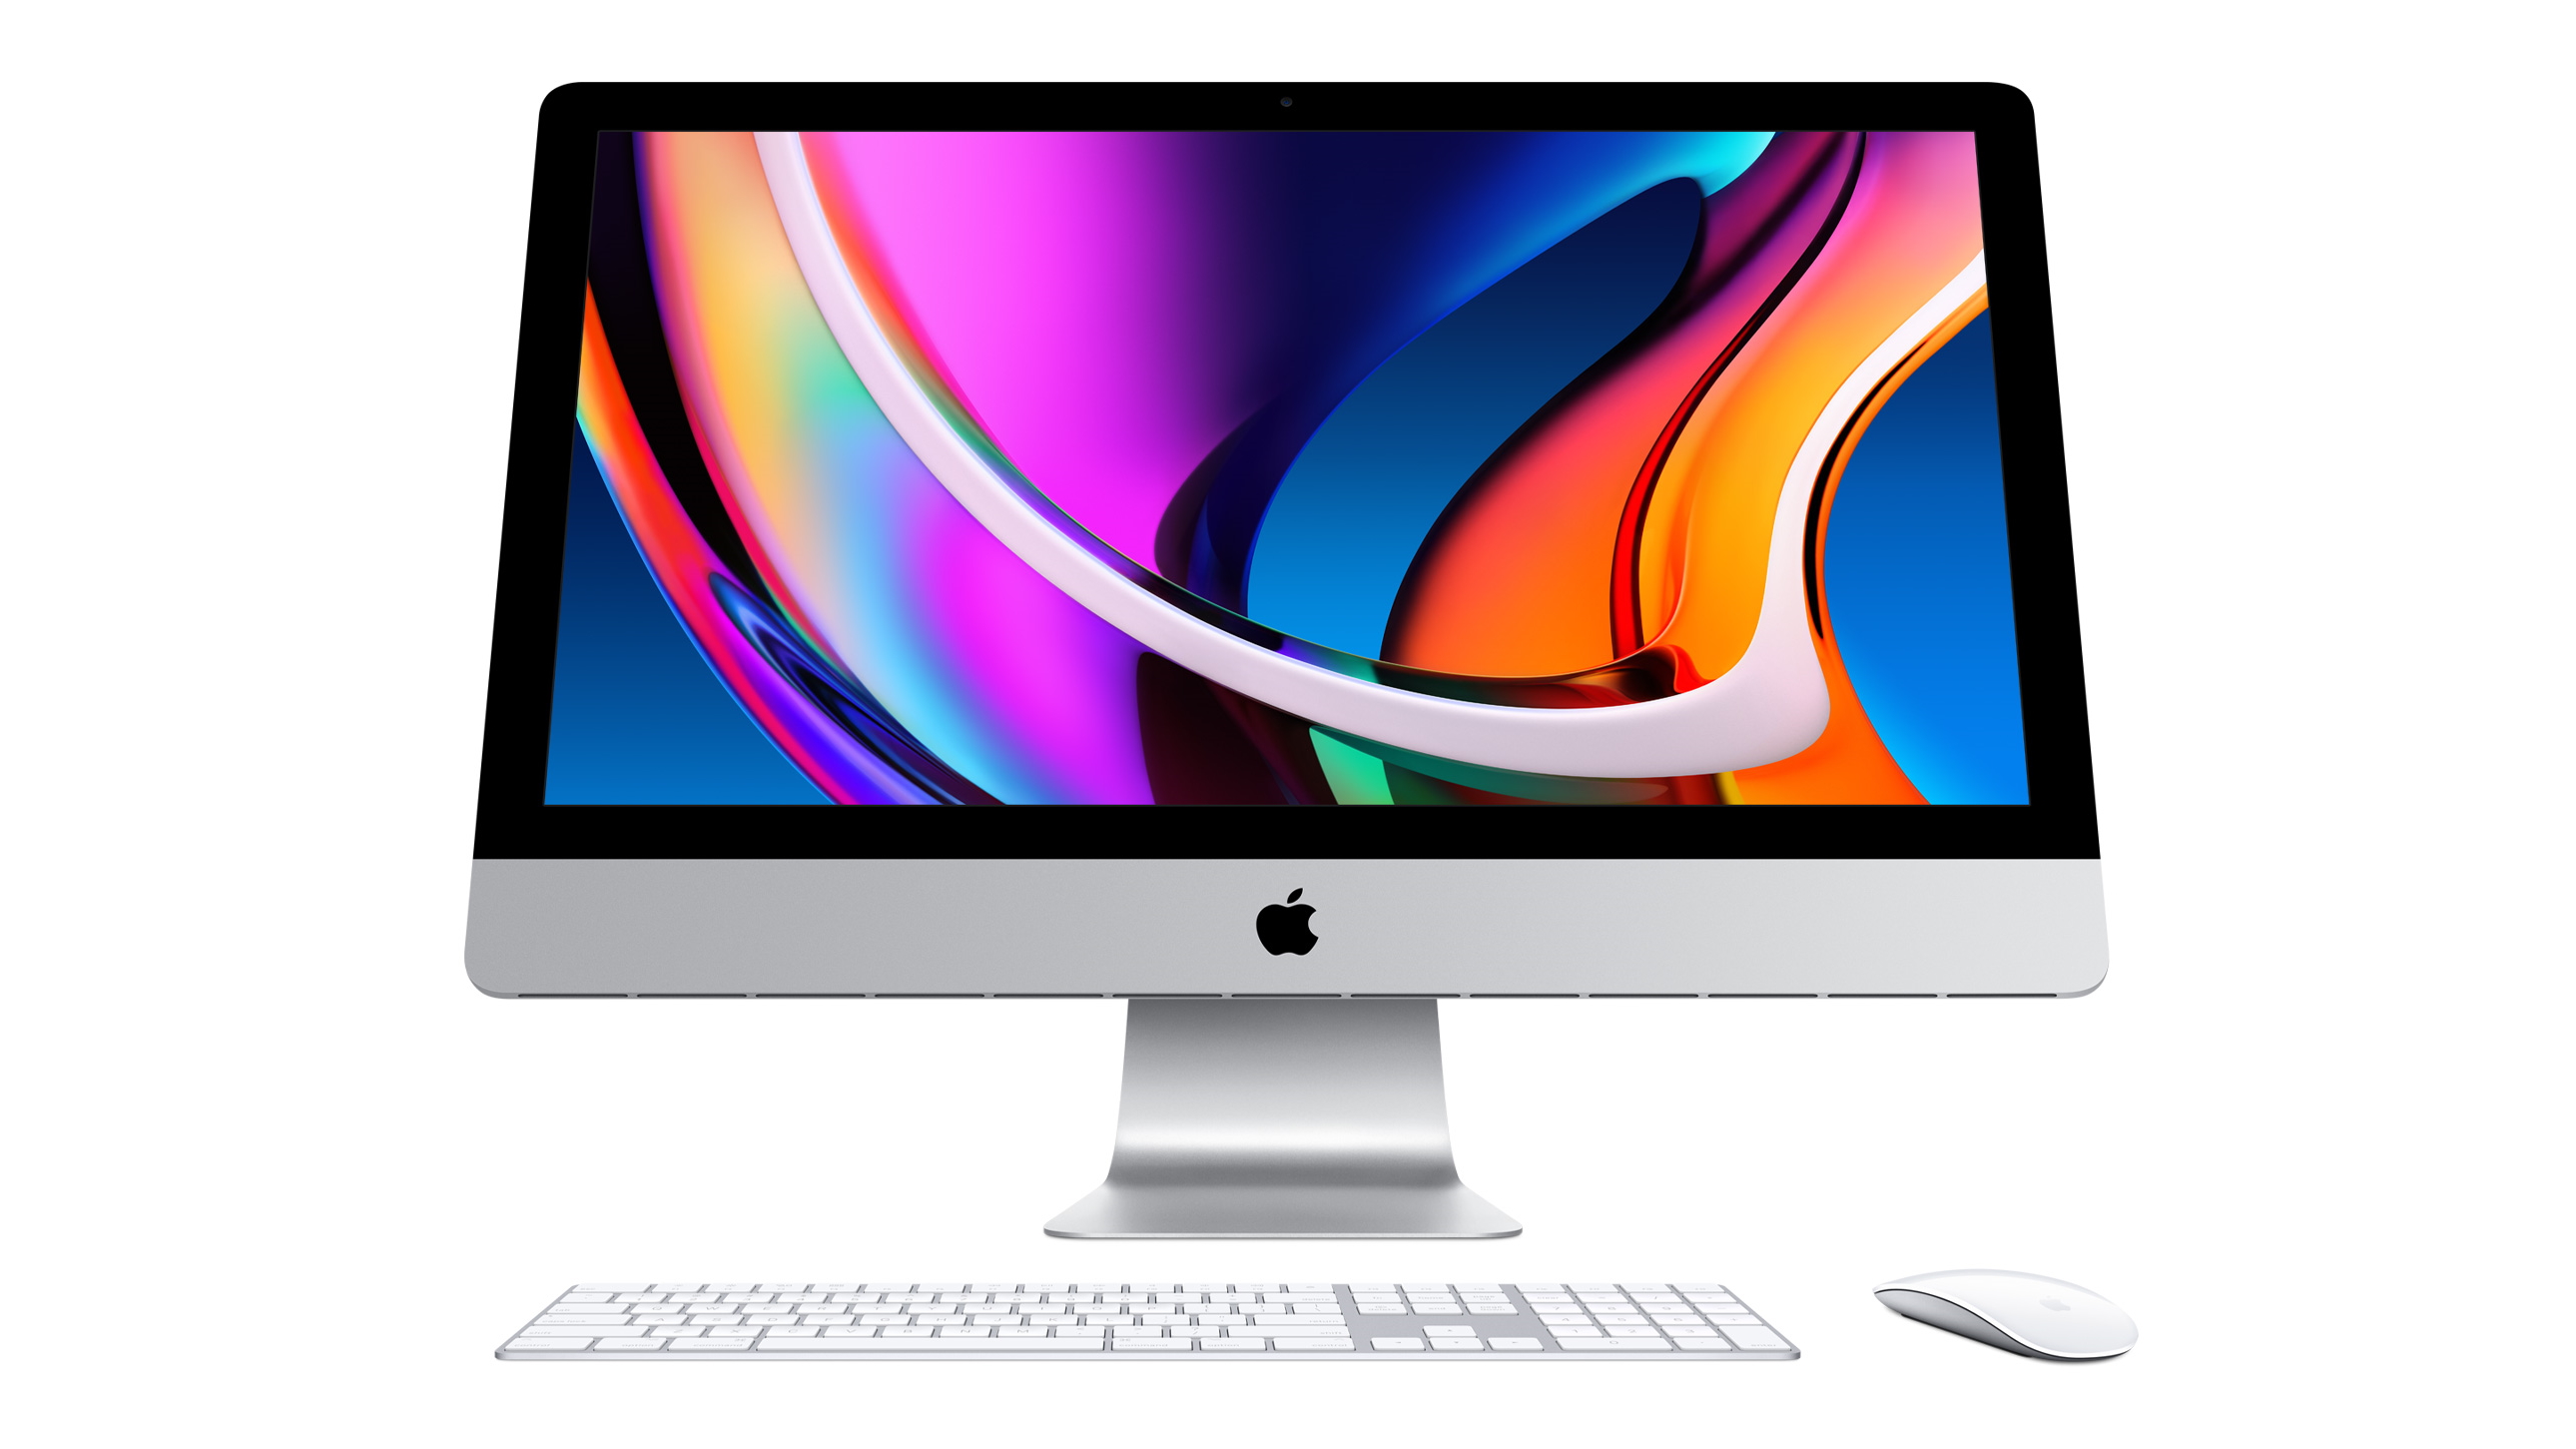 Apple 27 Inch Imac With 5k Display Will The Indian Audience Pay This